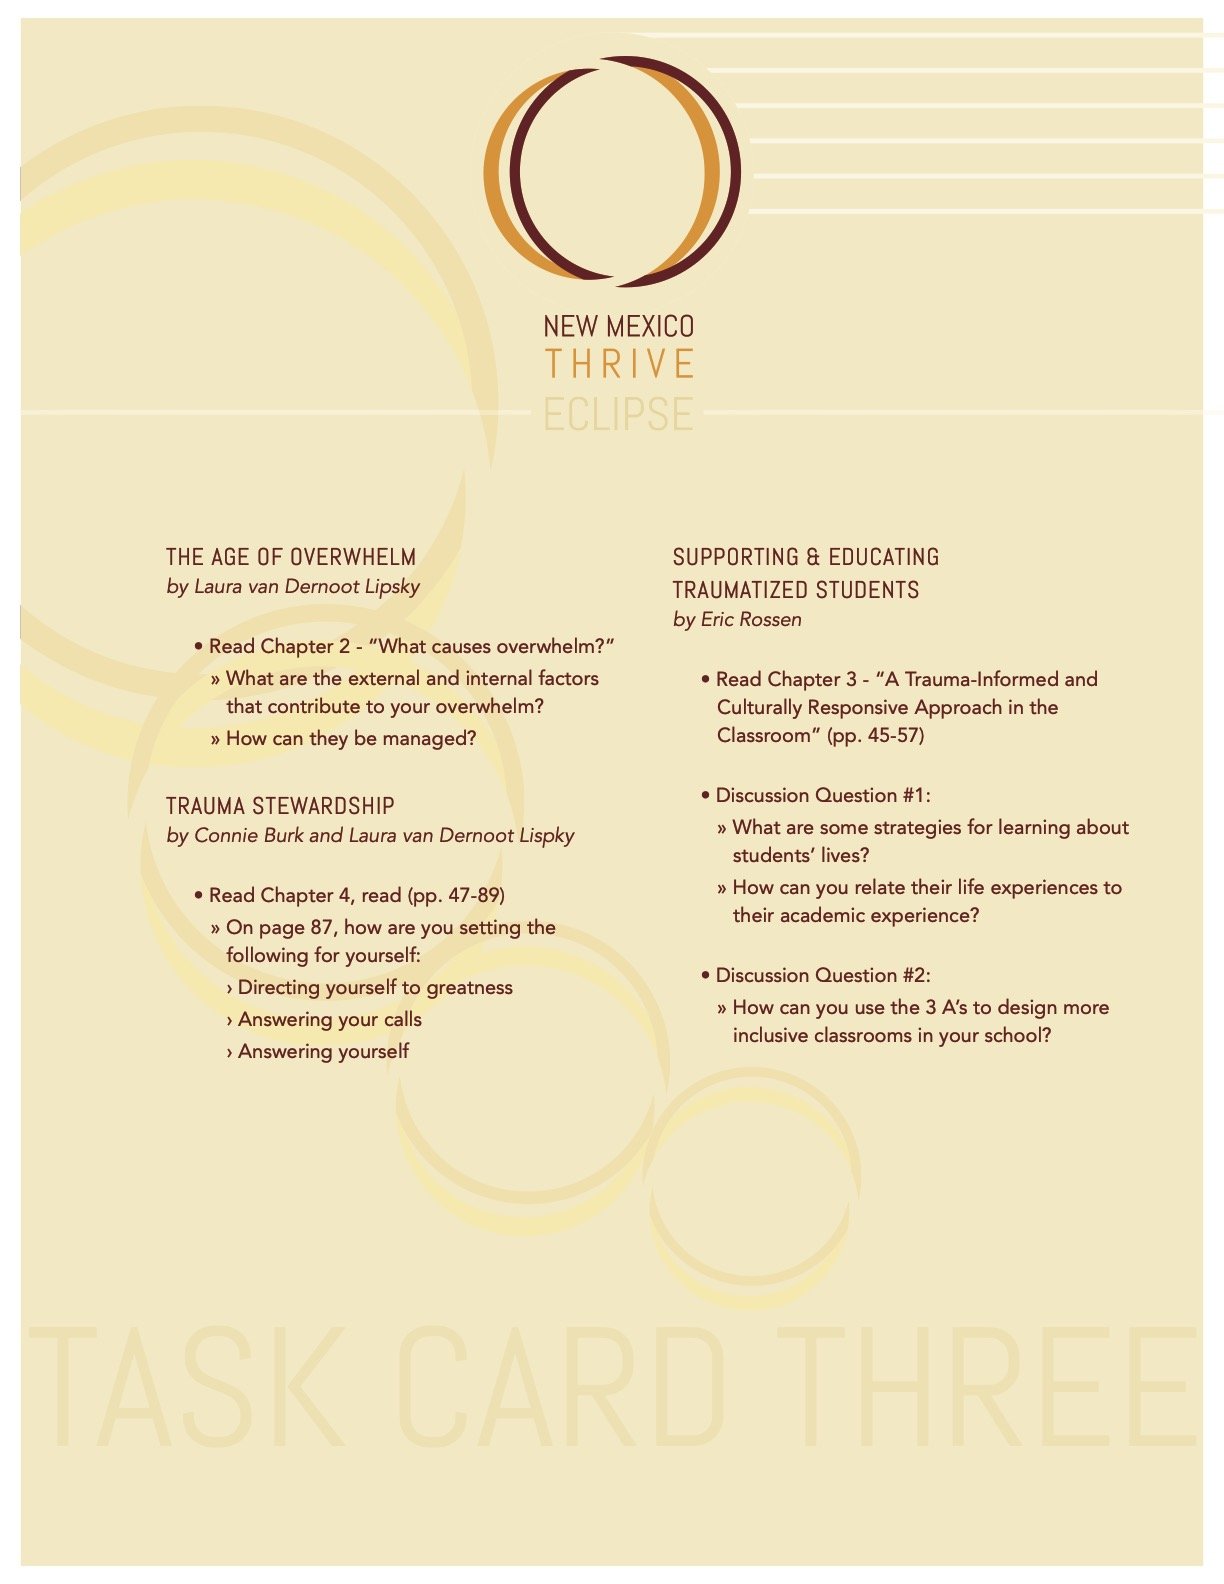 THRIVE ECLIPSE Task Card 3